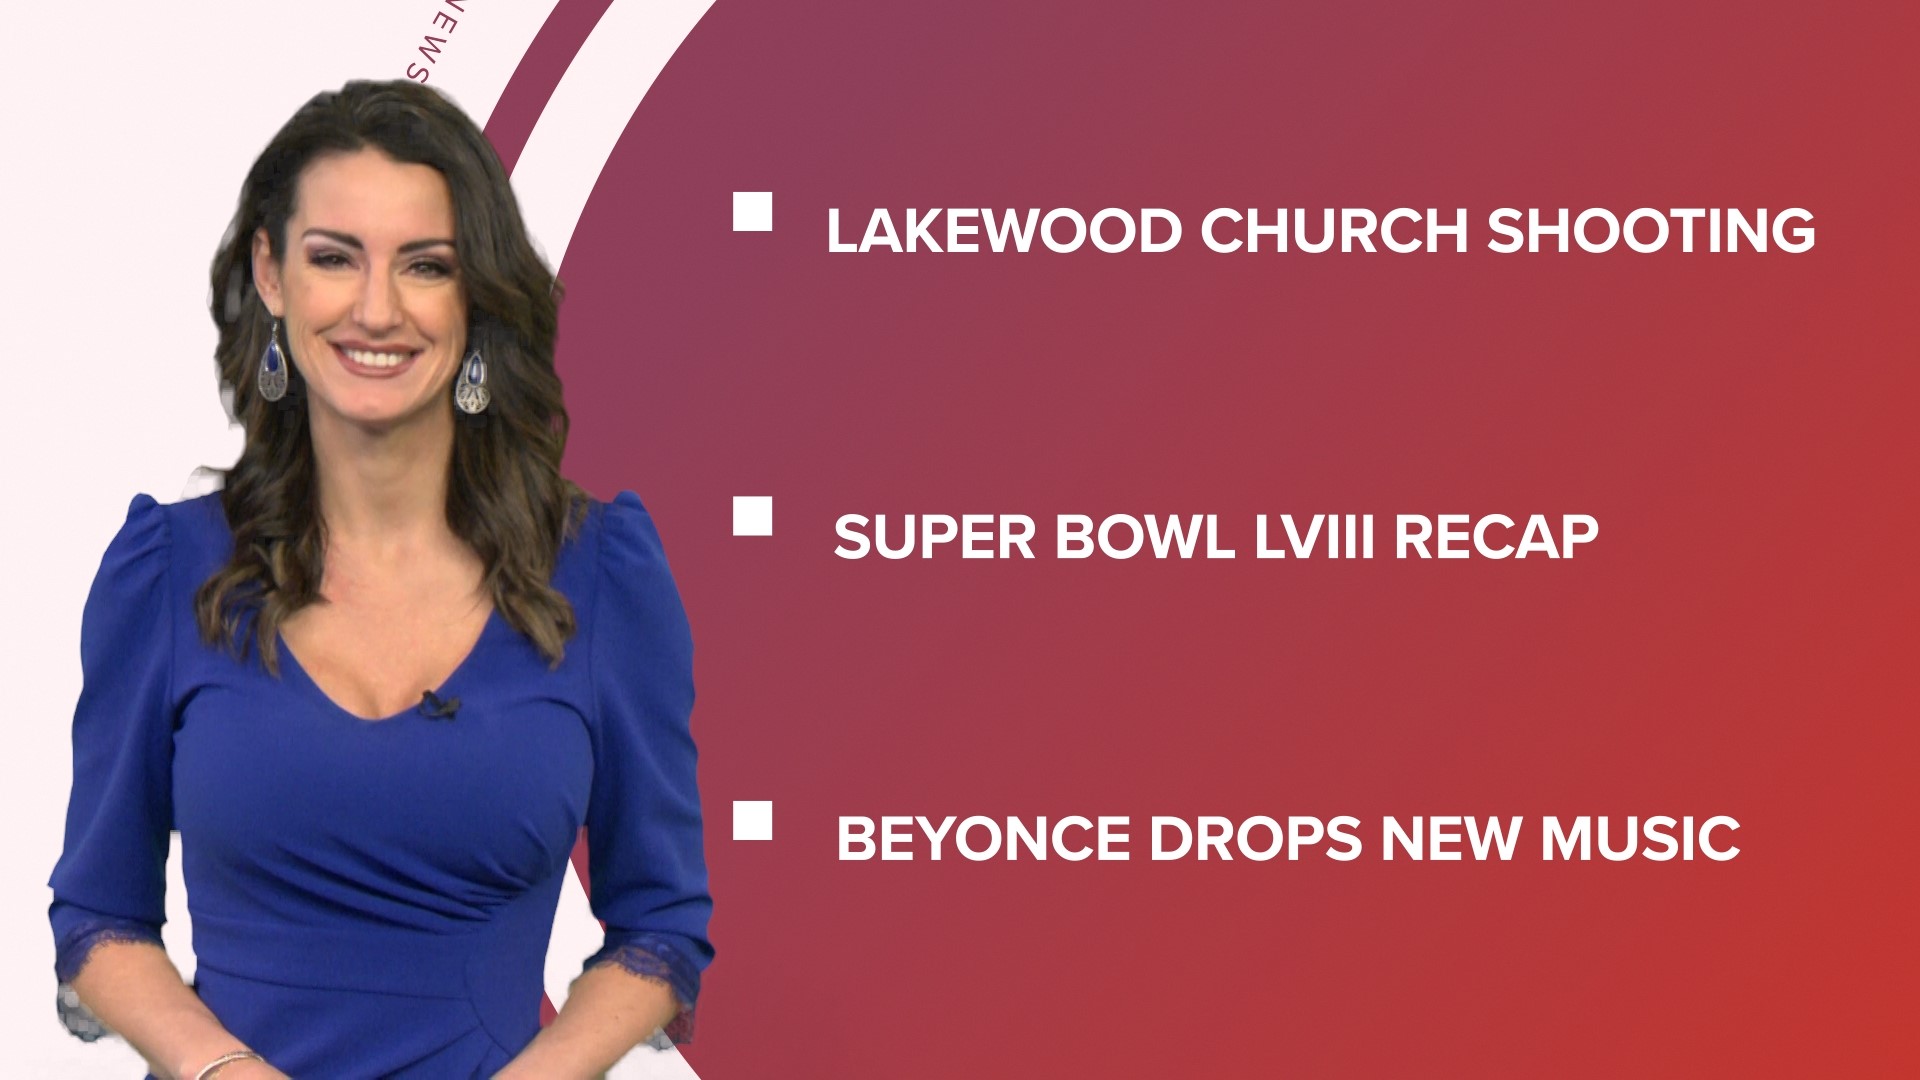 A look at what is happening in the news from a shooting at a Houston megachurch to Super Bowl LVIII and everything around the big game.